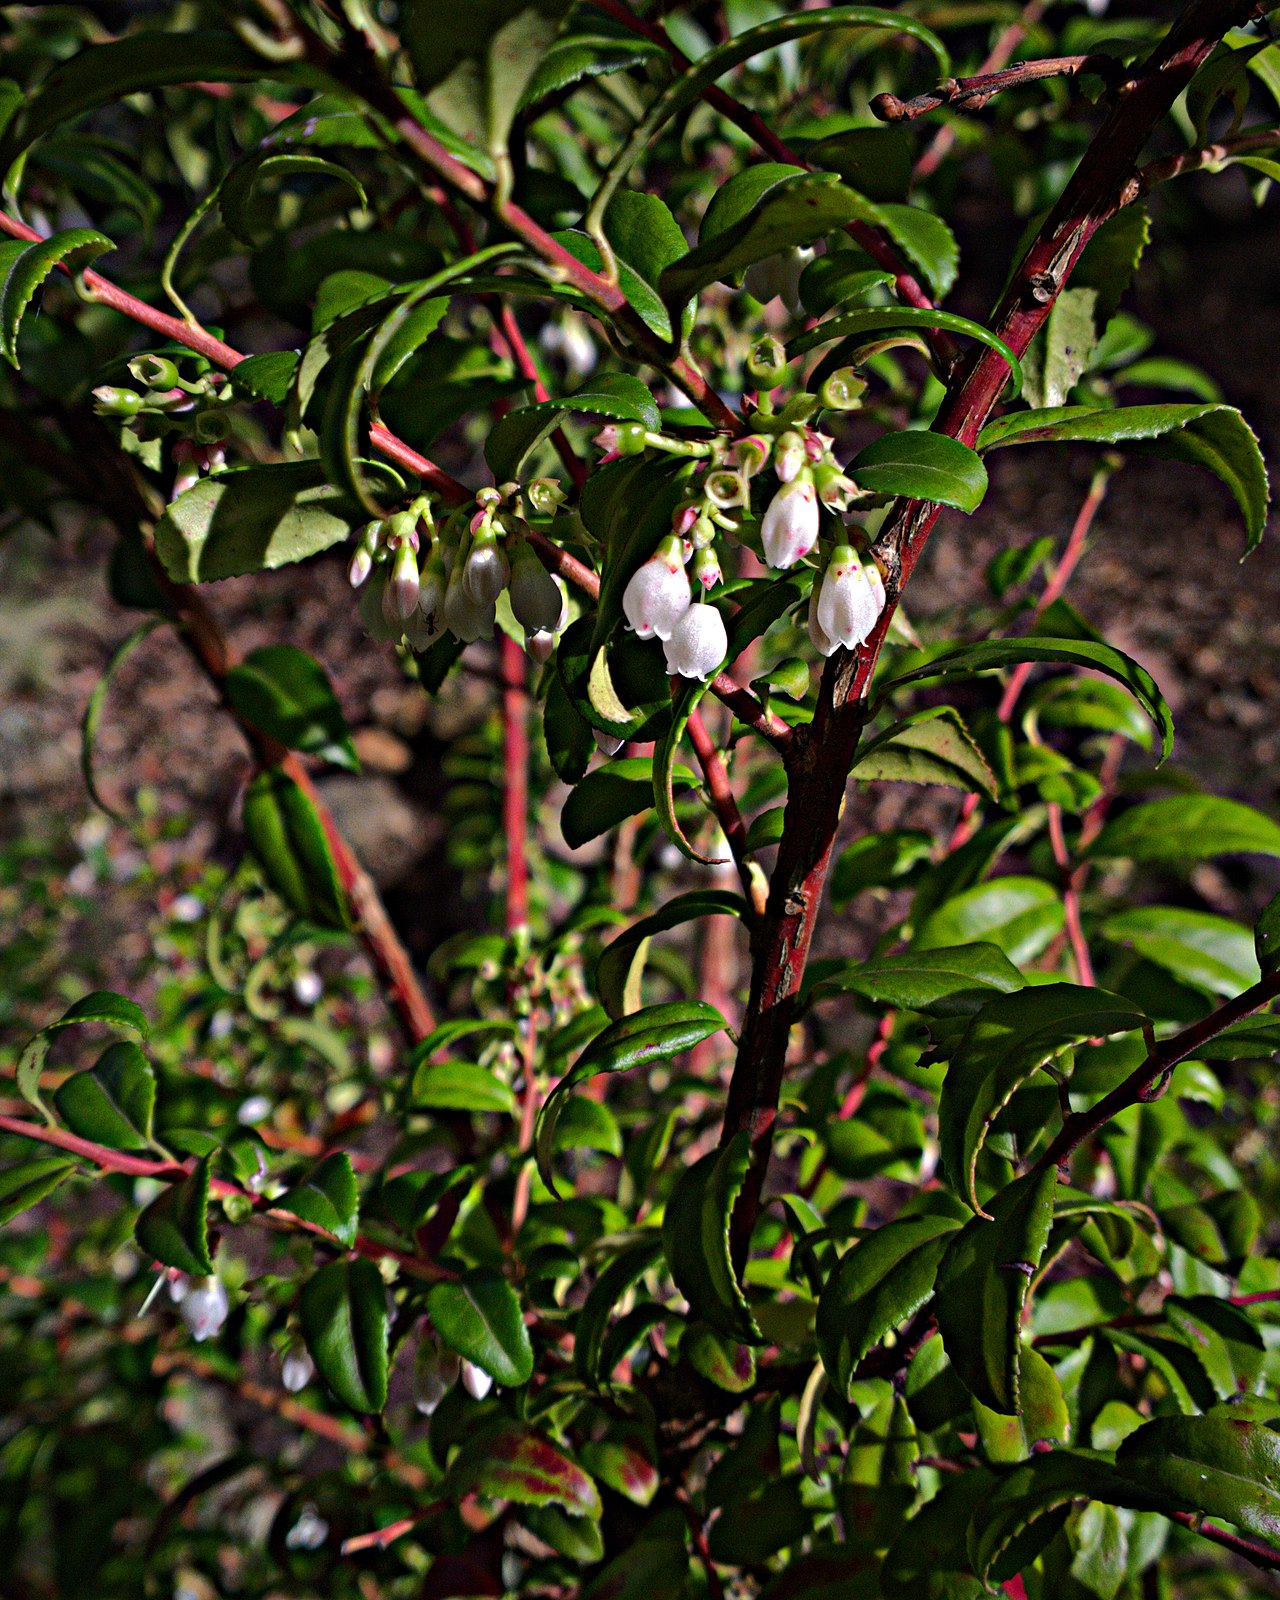 a shrub with reddish branches and small green leaves. the picture shows pale blossoms that droop downwards.